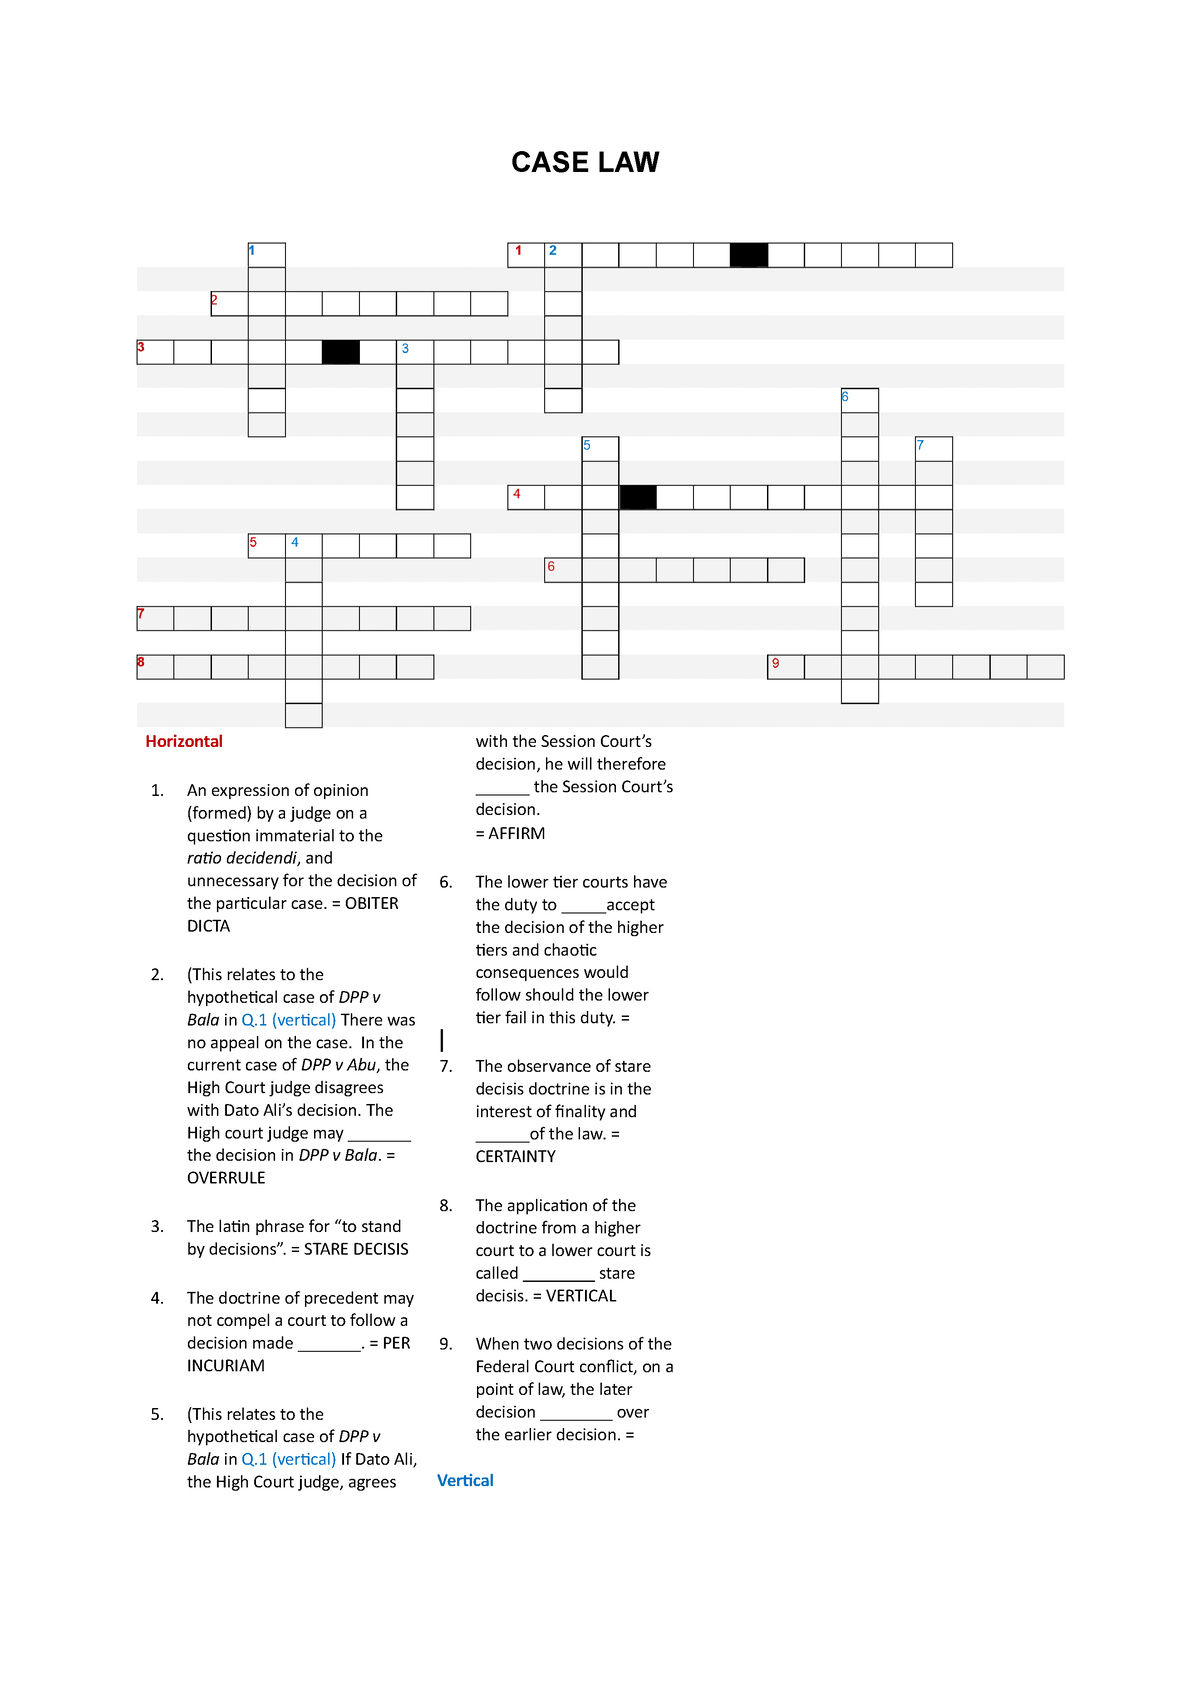 Tutorial 6 Crossword puzzle CASE LAW Horizontal An expression of